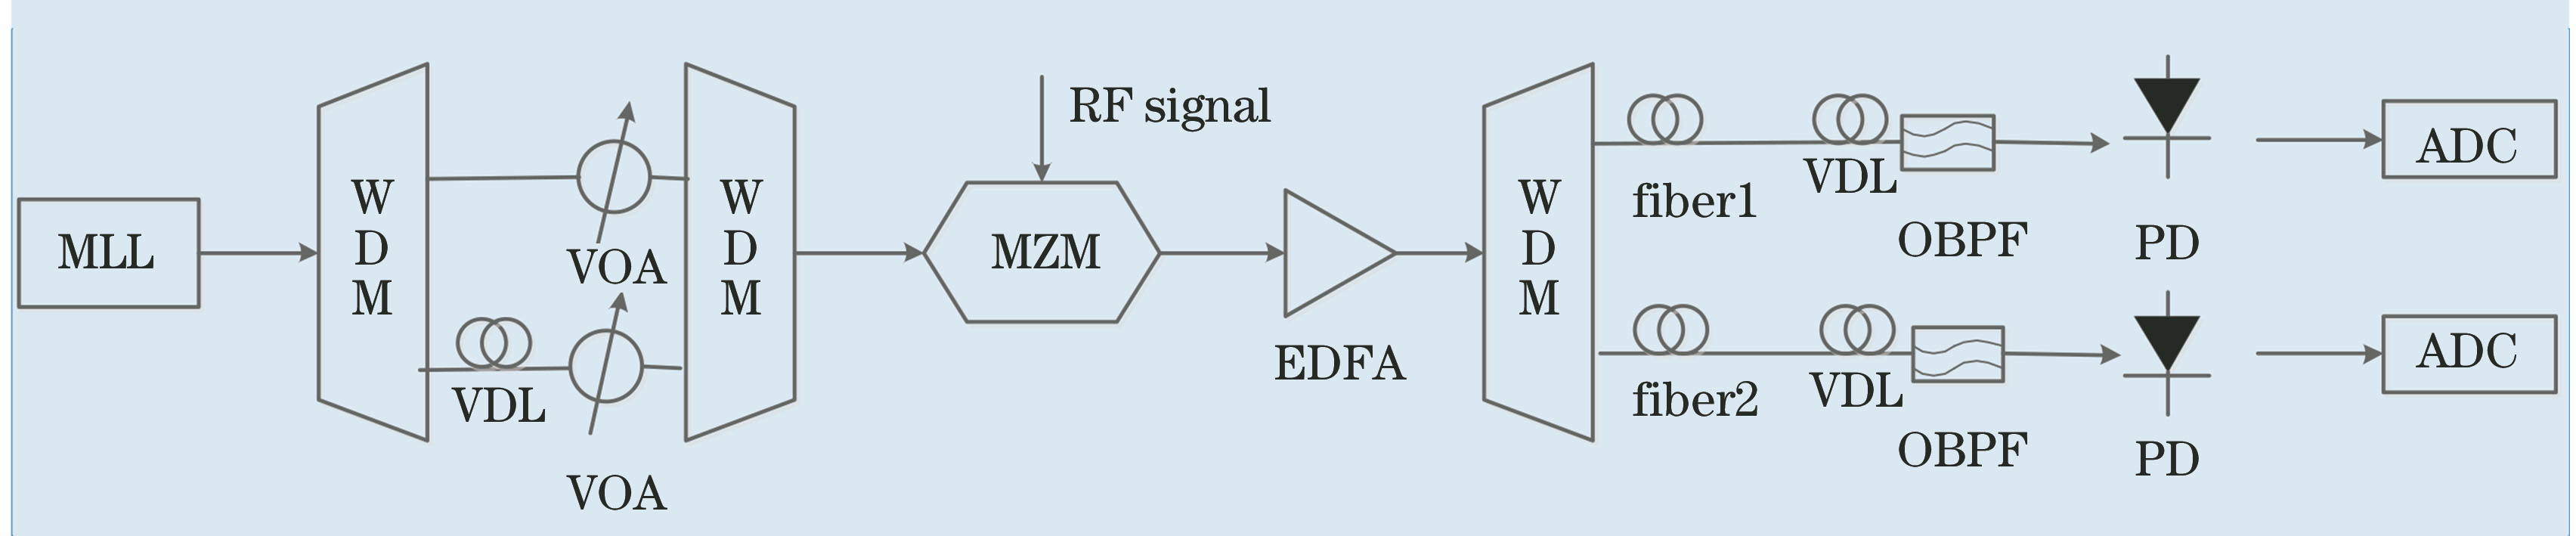 Structure of dual-channel PTS-ADC system. MLL: mode-locked laser; WDM: wavelength division multiplexer; VDL: variable delay line; VOA: variable optical attenuator; EDFA: erbium doped fiber amplifier; OBPF: optical band-pass filter; ADC: analog-to-digital converter